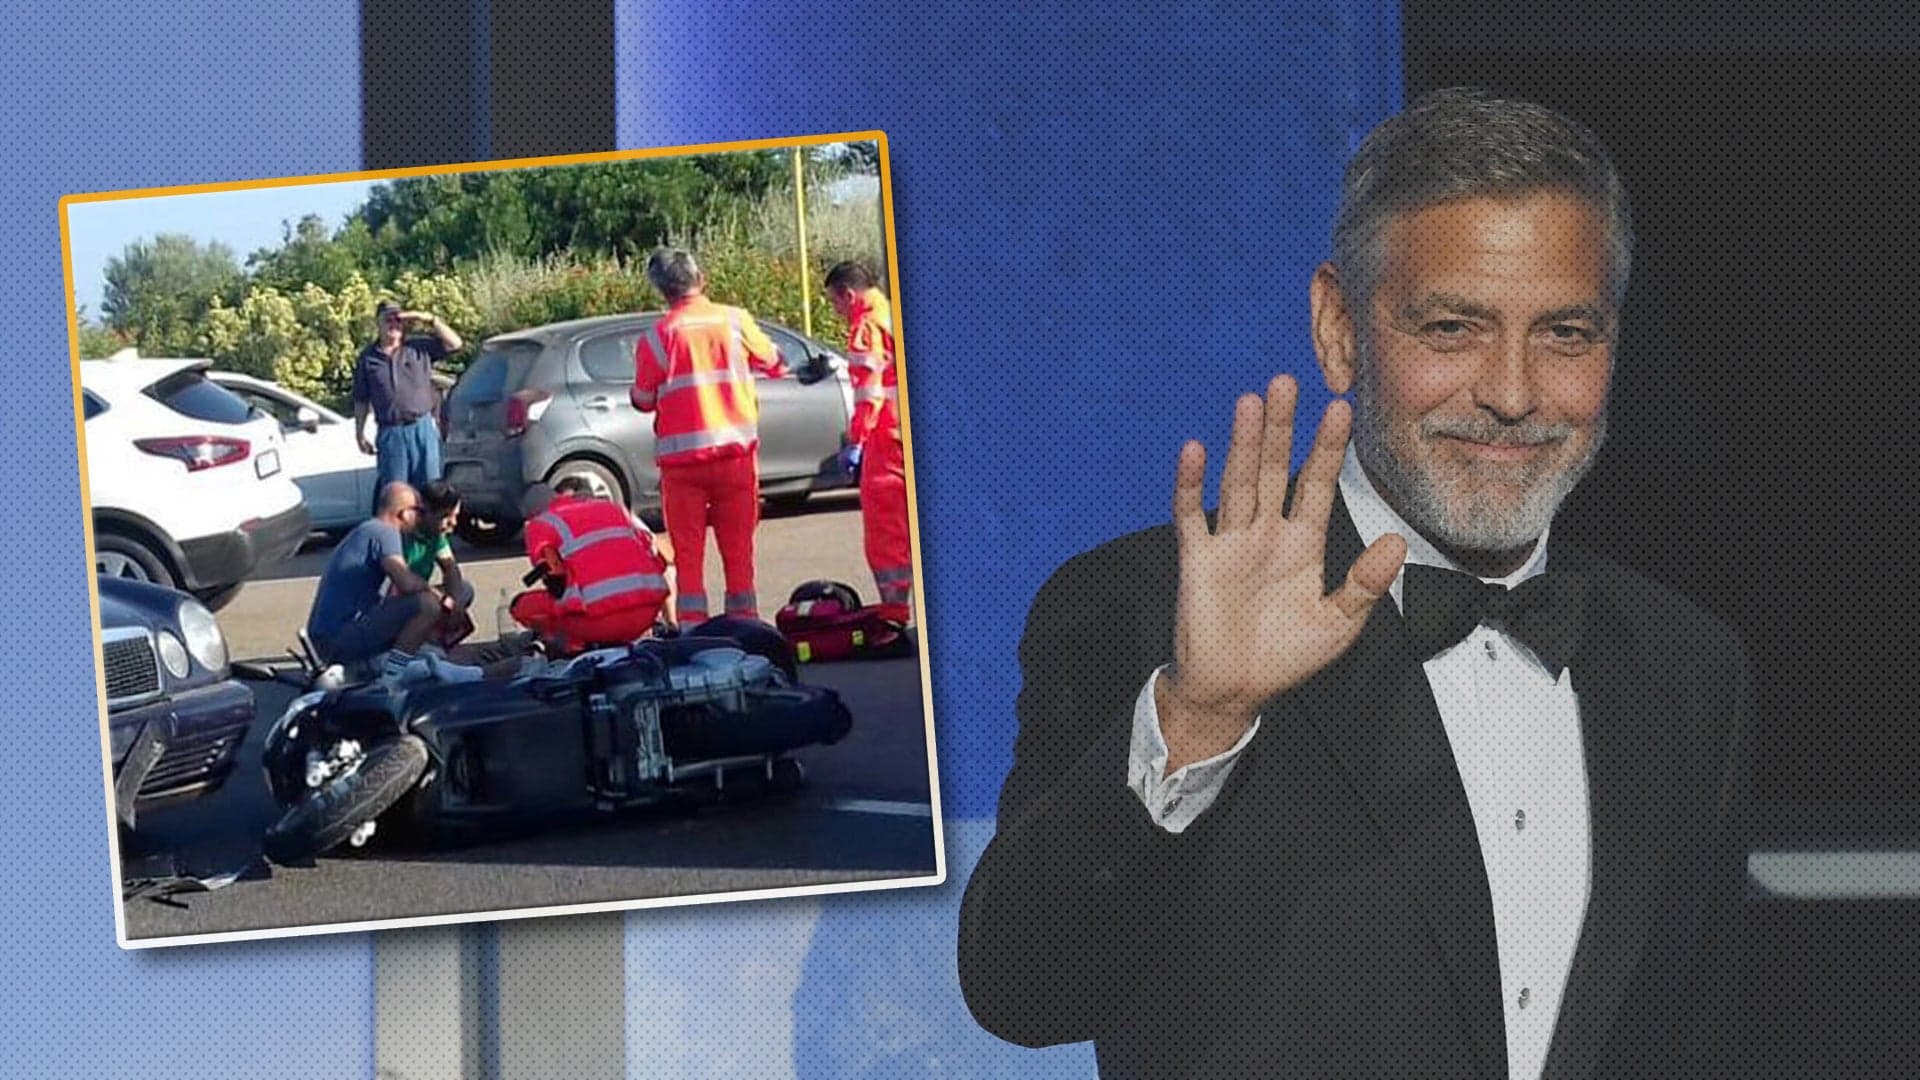 Actor George Clooney Recovering After Serious Motorcycle Crash in Italy